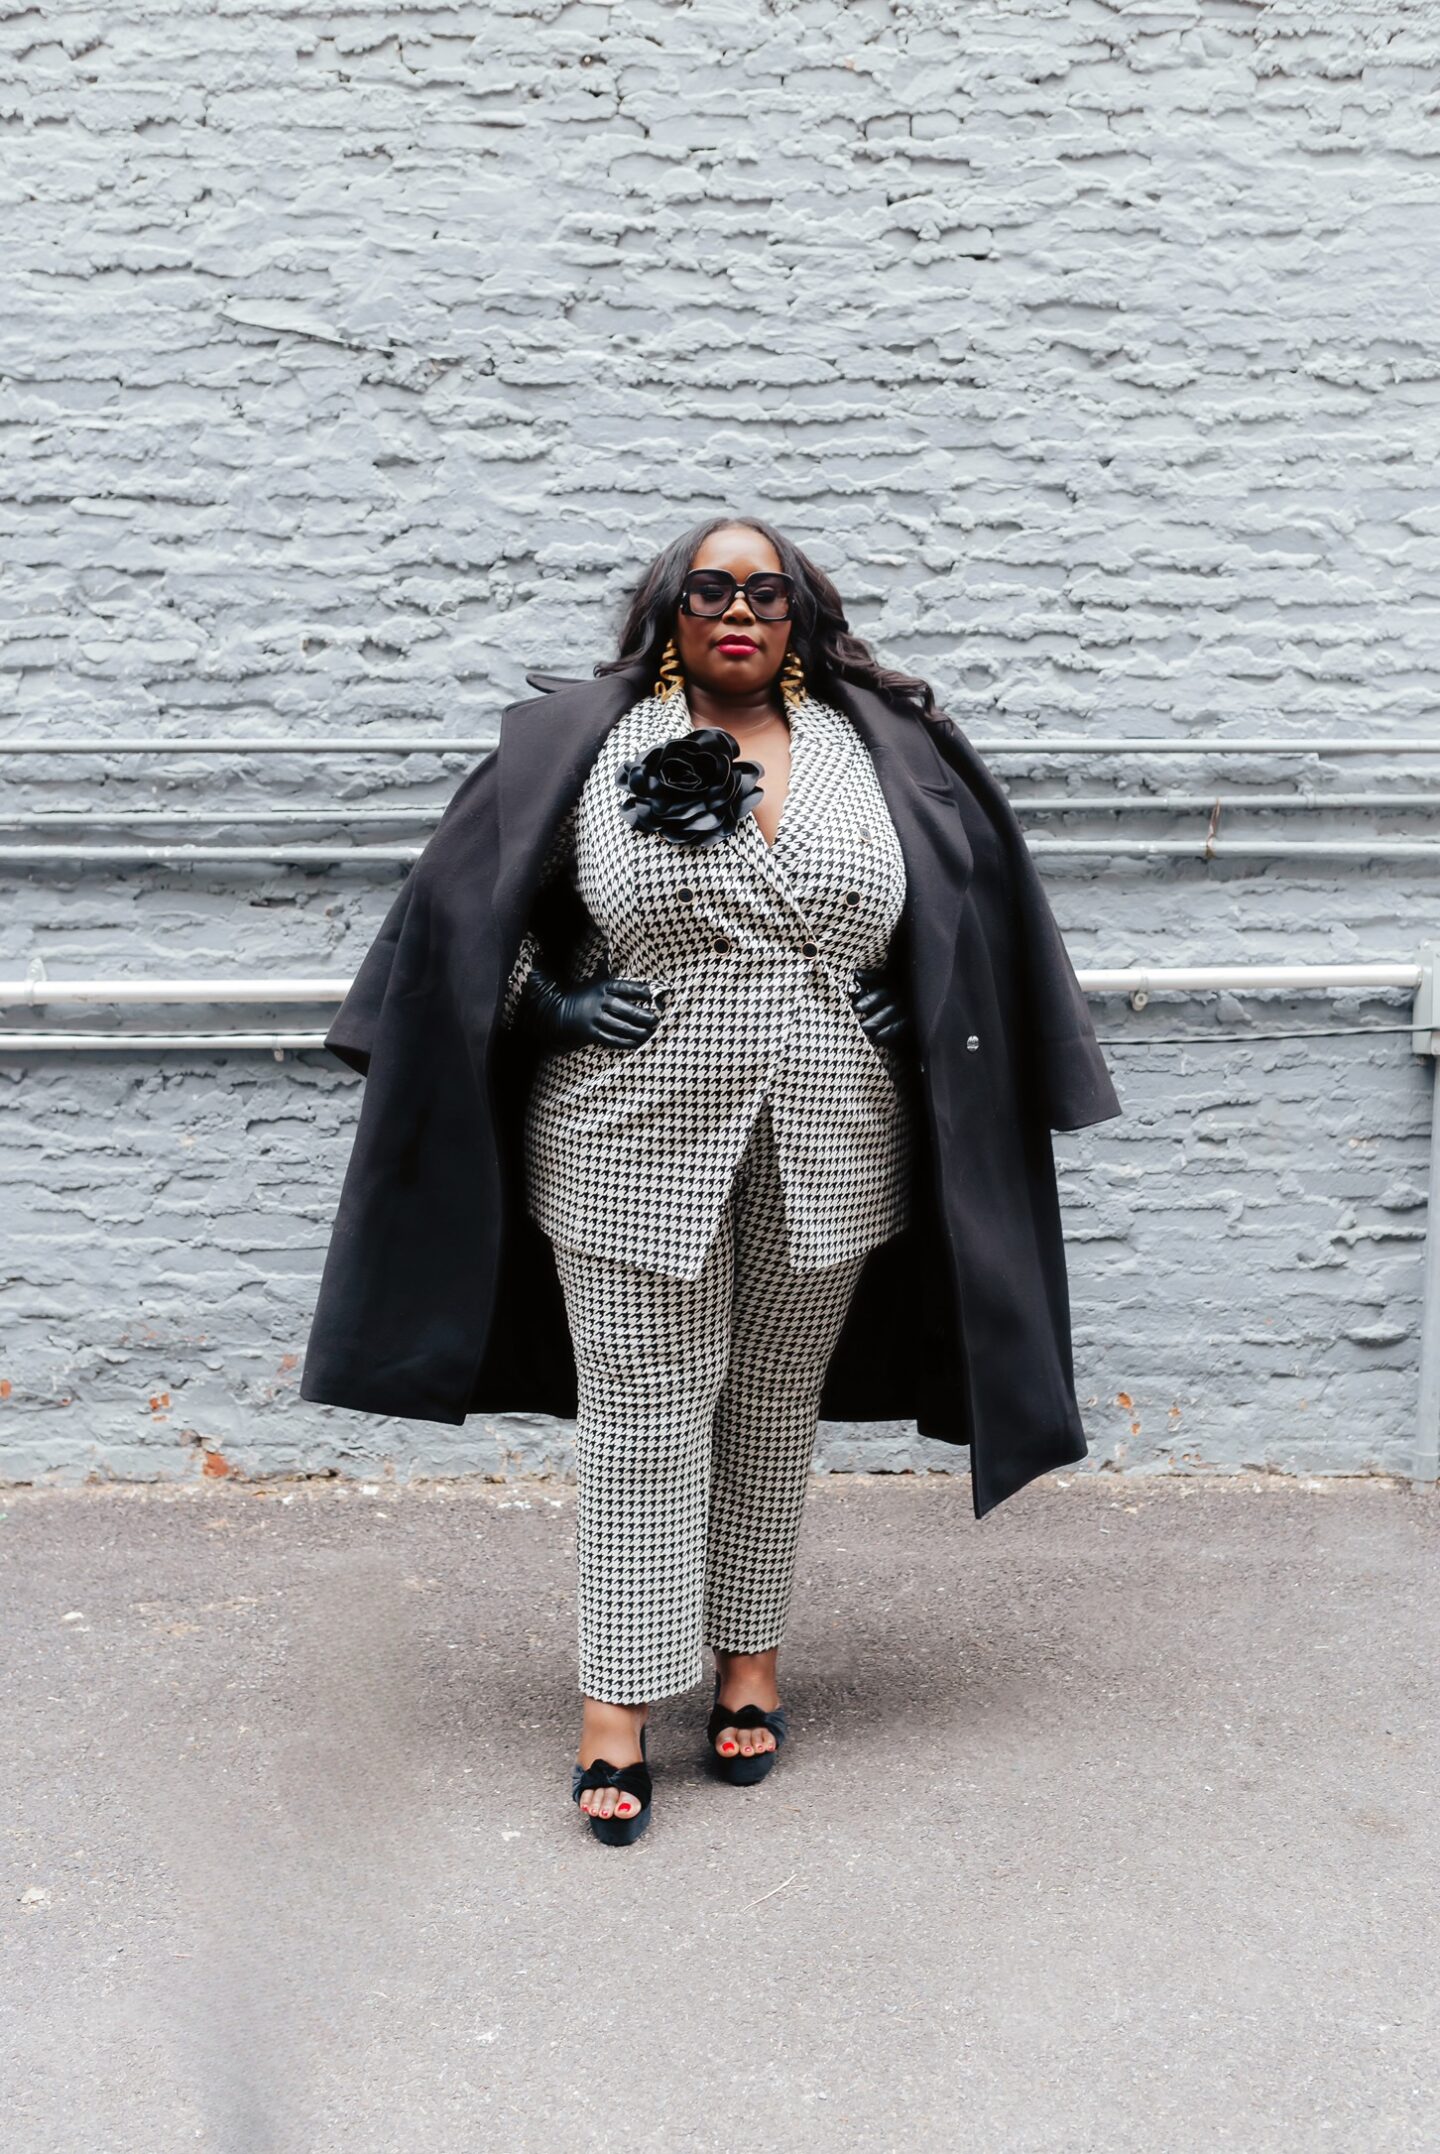  New York Fashion Week style for plus size and curvy women